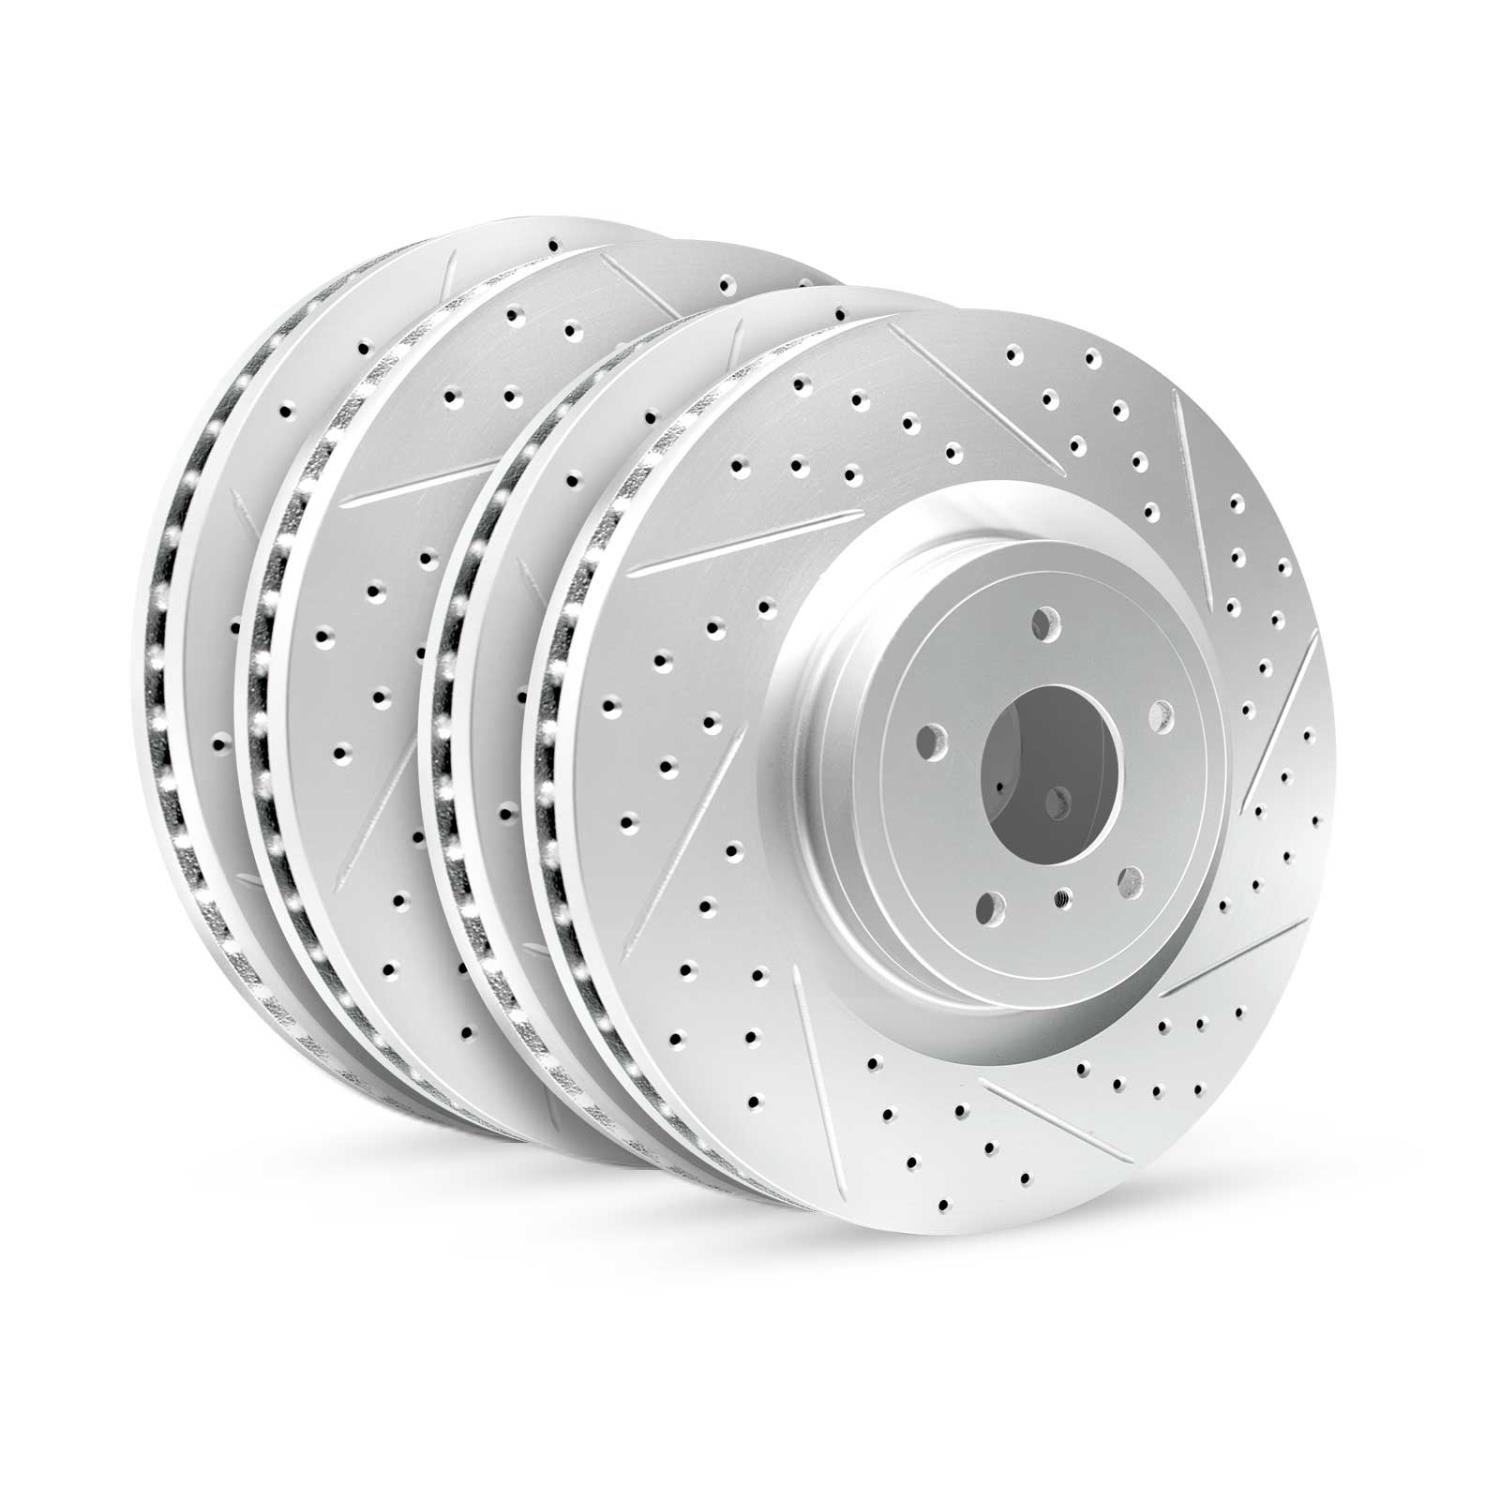 GEO-Carbon Drilled/Slotted Rotors, 1999-2006 BMW, Position: Front/Rear